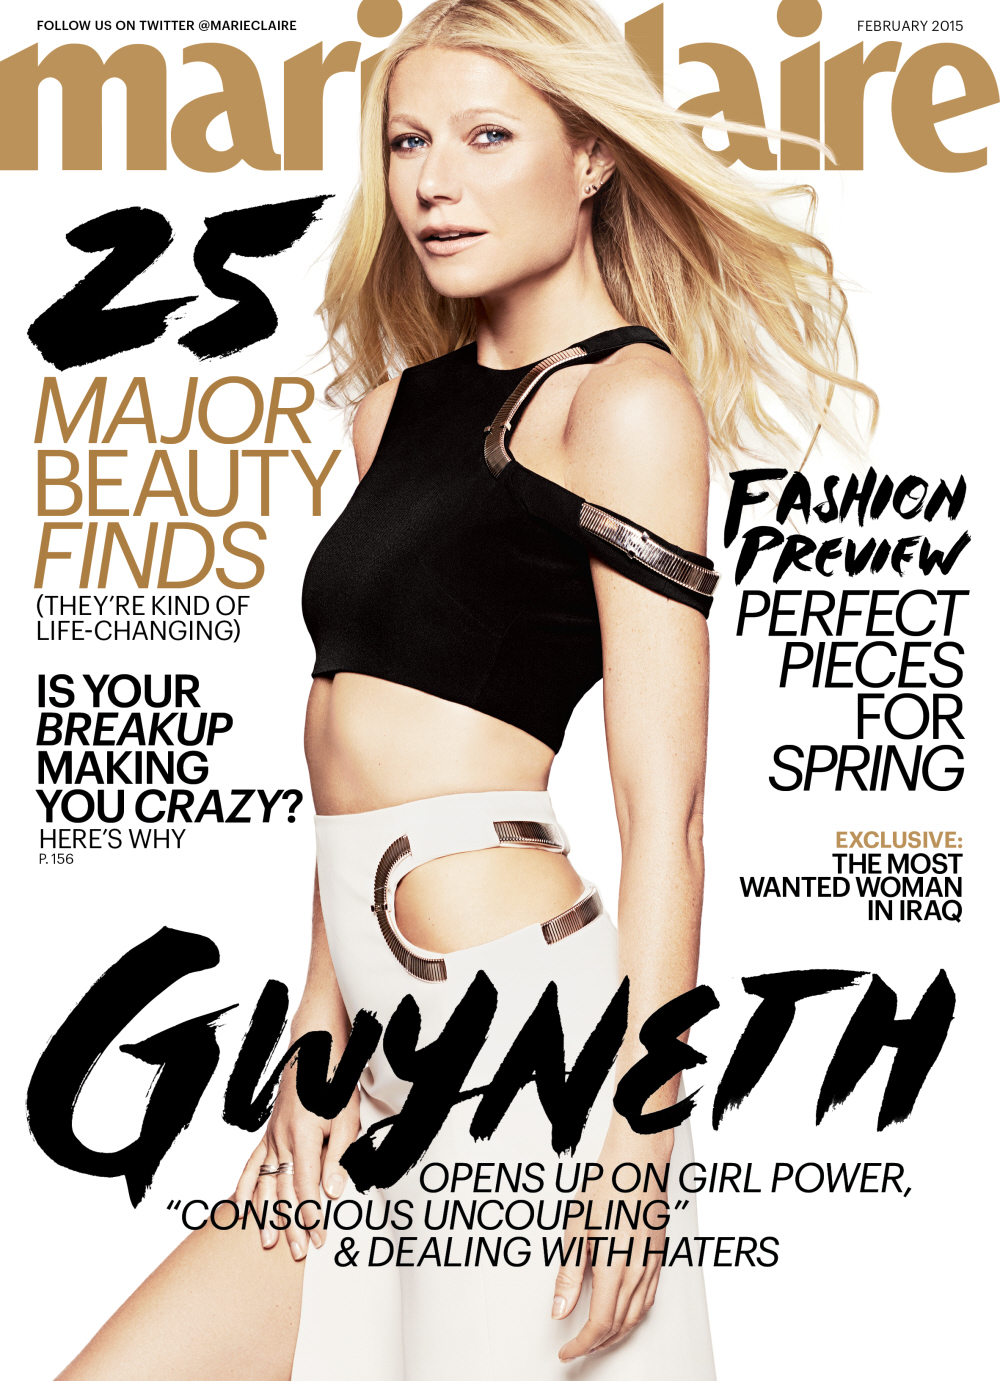 Marie Claire Feb '15 - Gwyneth Paltrow - Newsstand